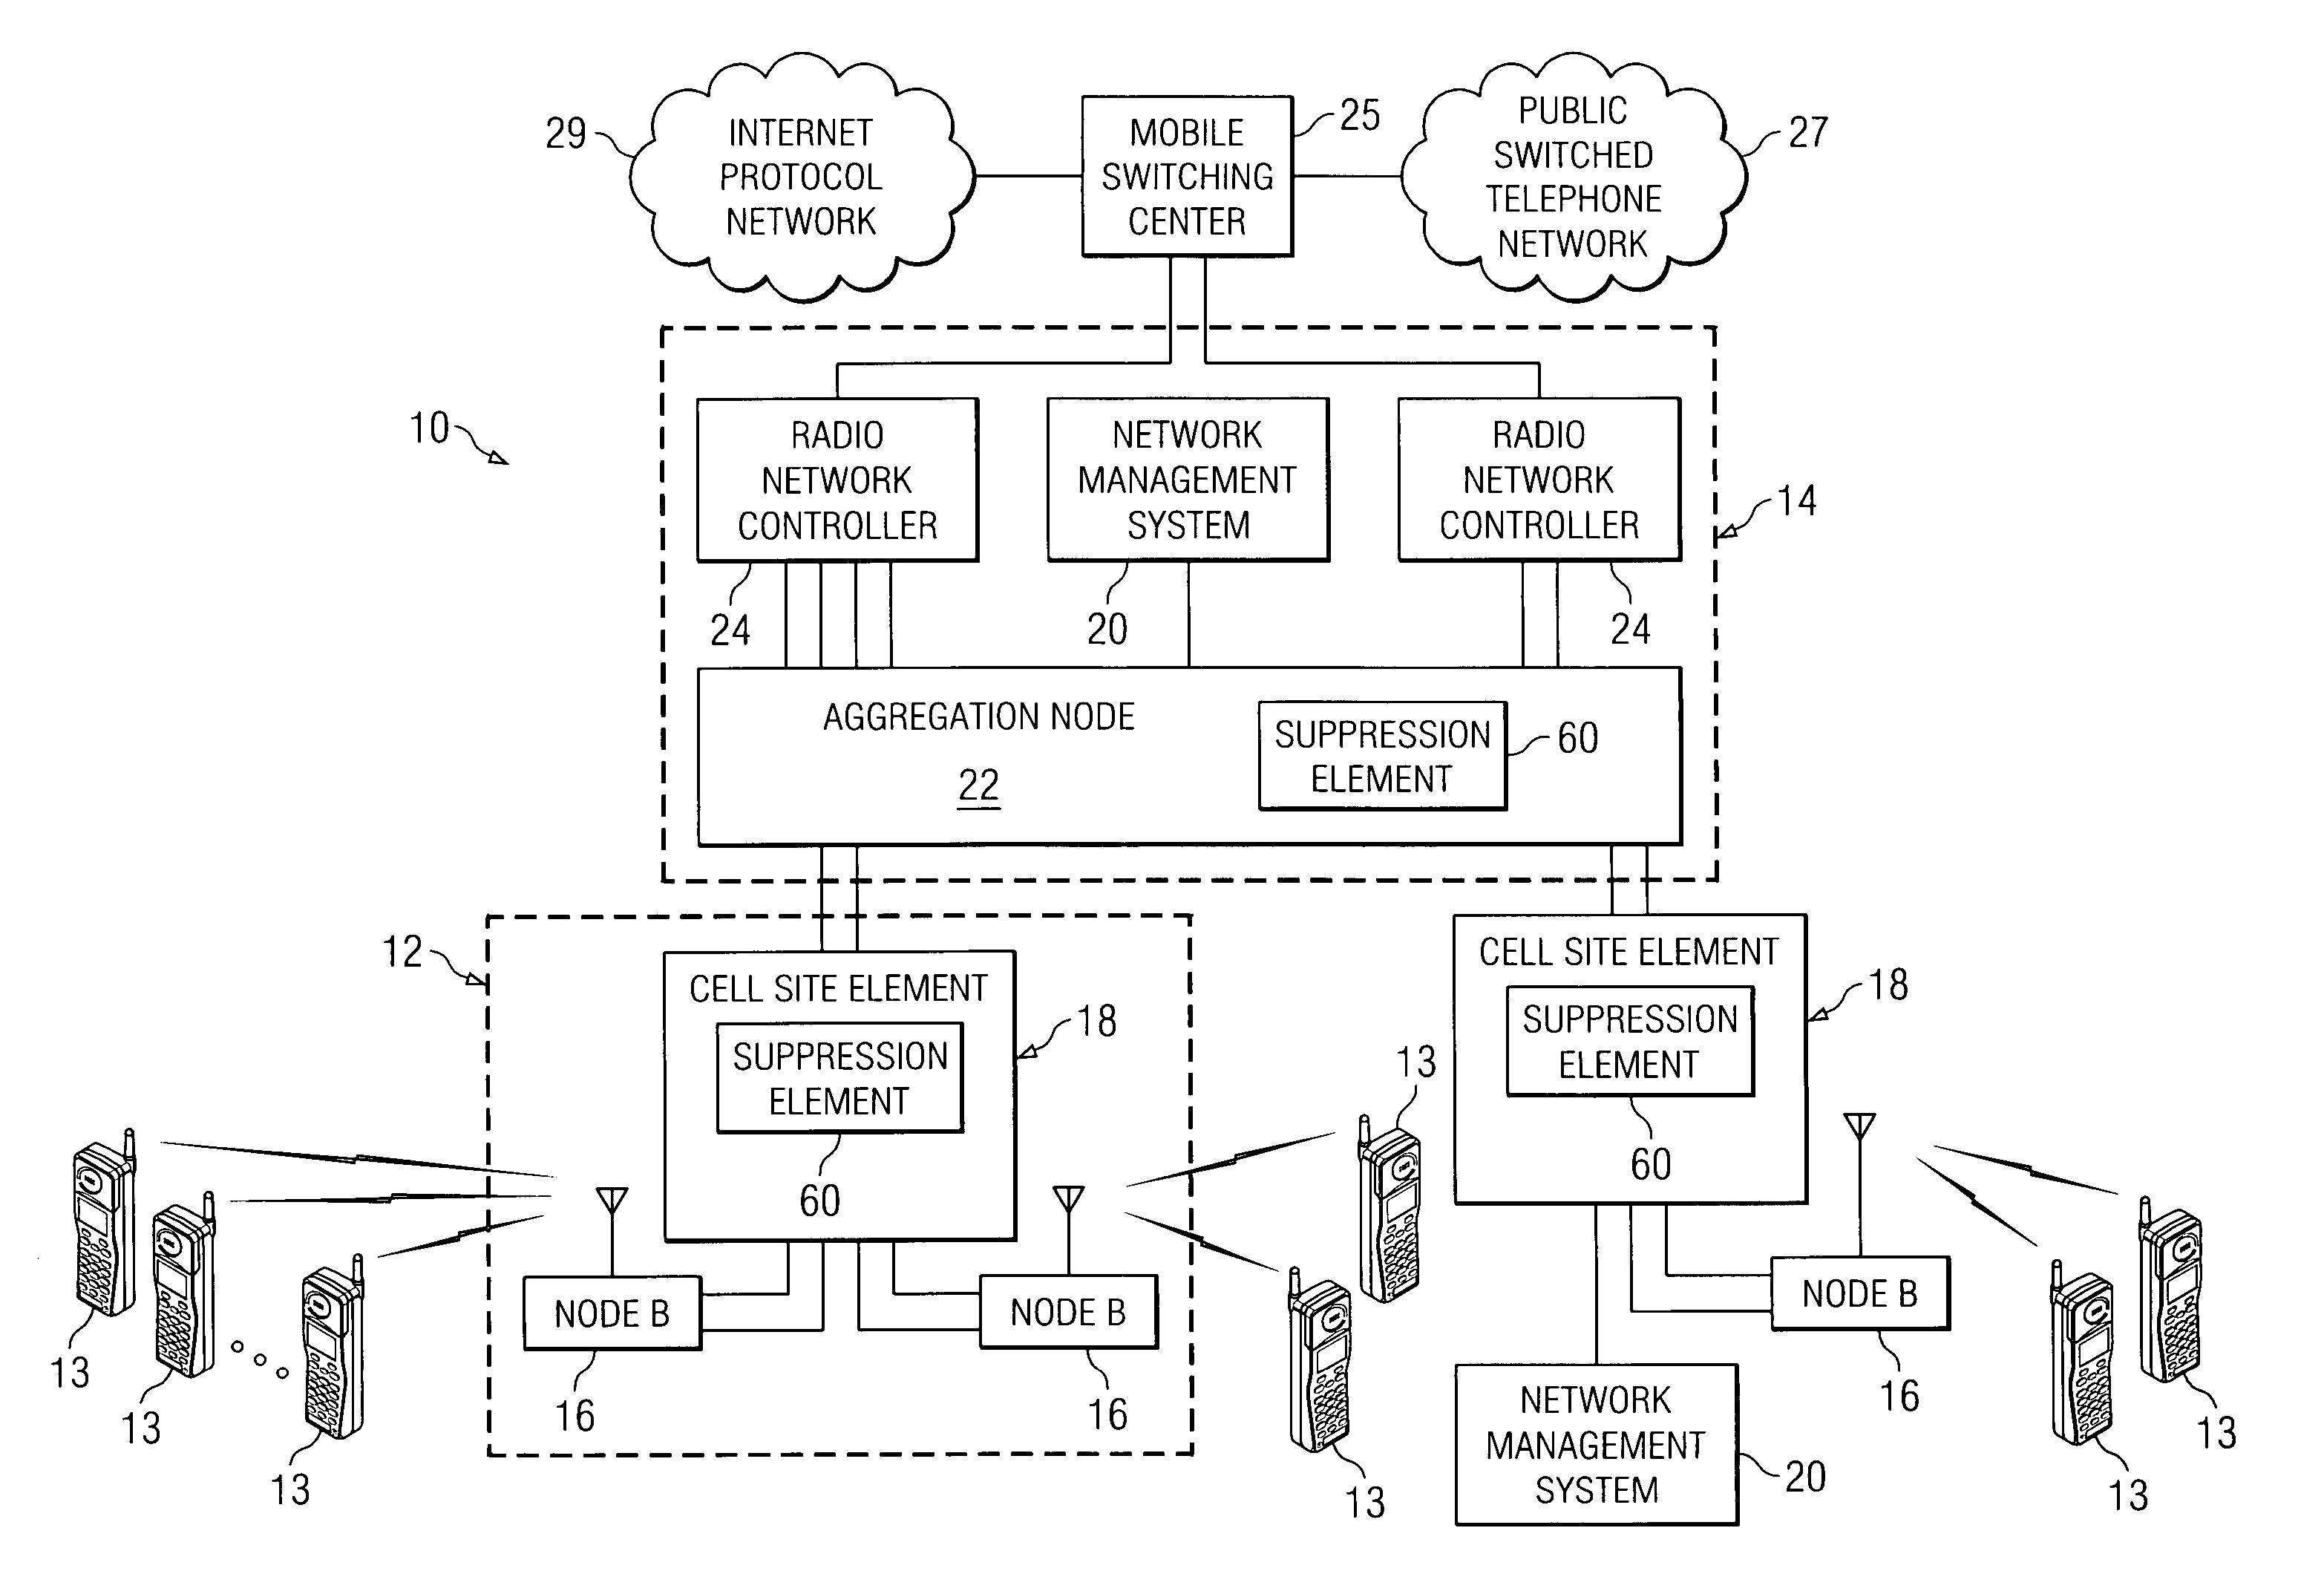 System and method for implementing suppression for asynchronous transfer mode (ATM) adaptation layer 2 (AAL2) traffic in a communications environment